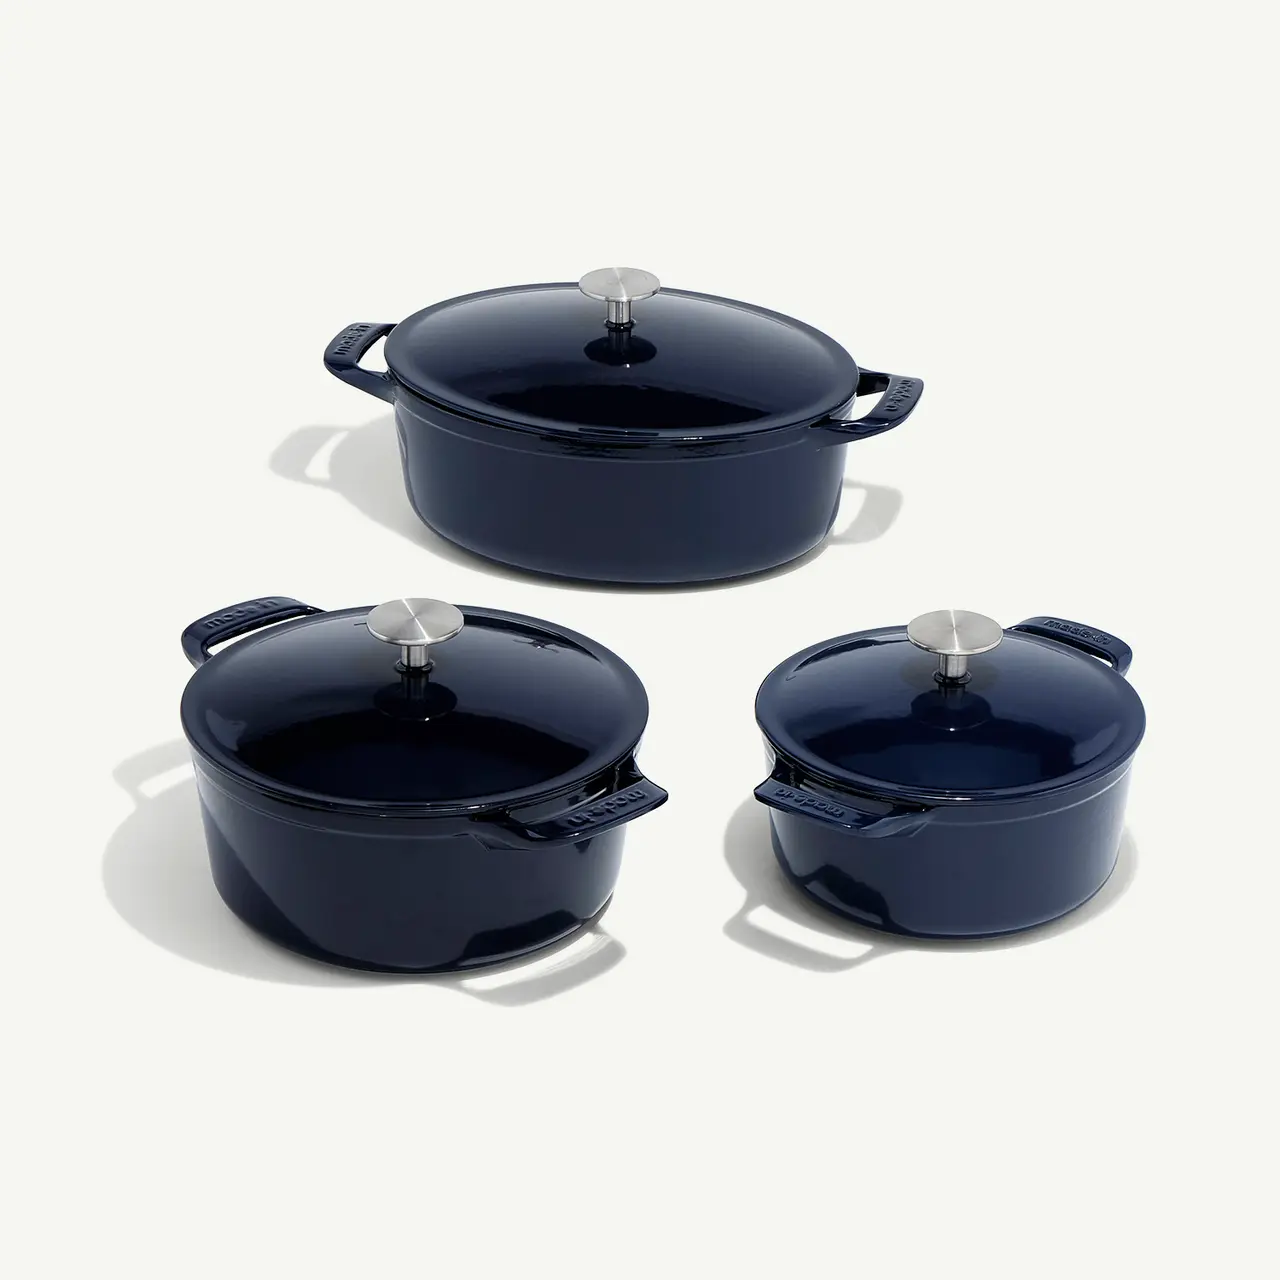 Three navy blue cast iron pots with lids are arranged on a light grey background.